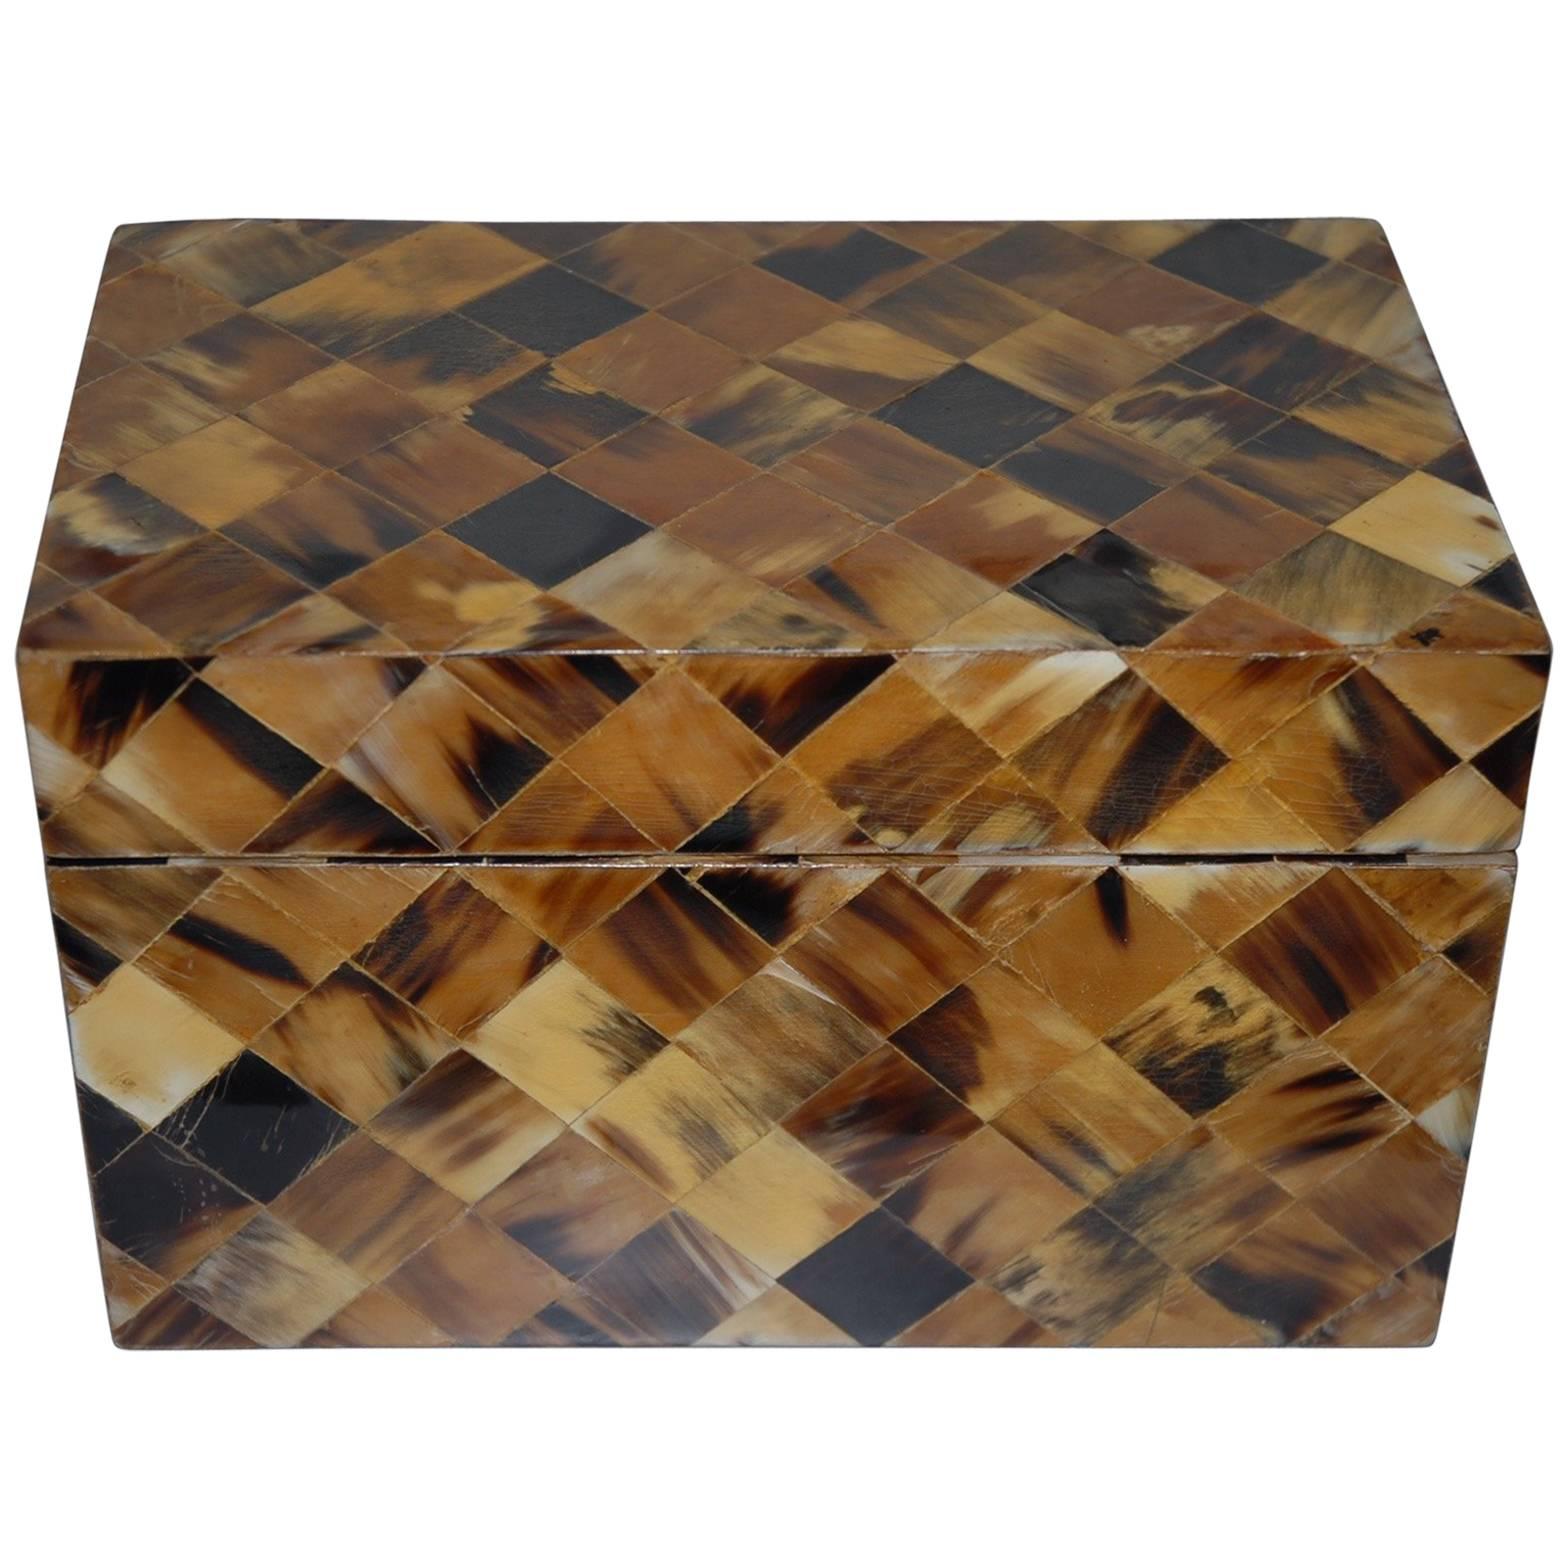 Late 20th Century Hand-Crafted Wooden Organic Treasure Box  Square Design Inlay